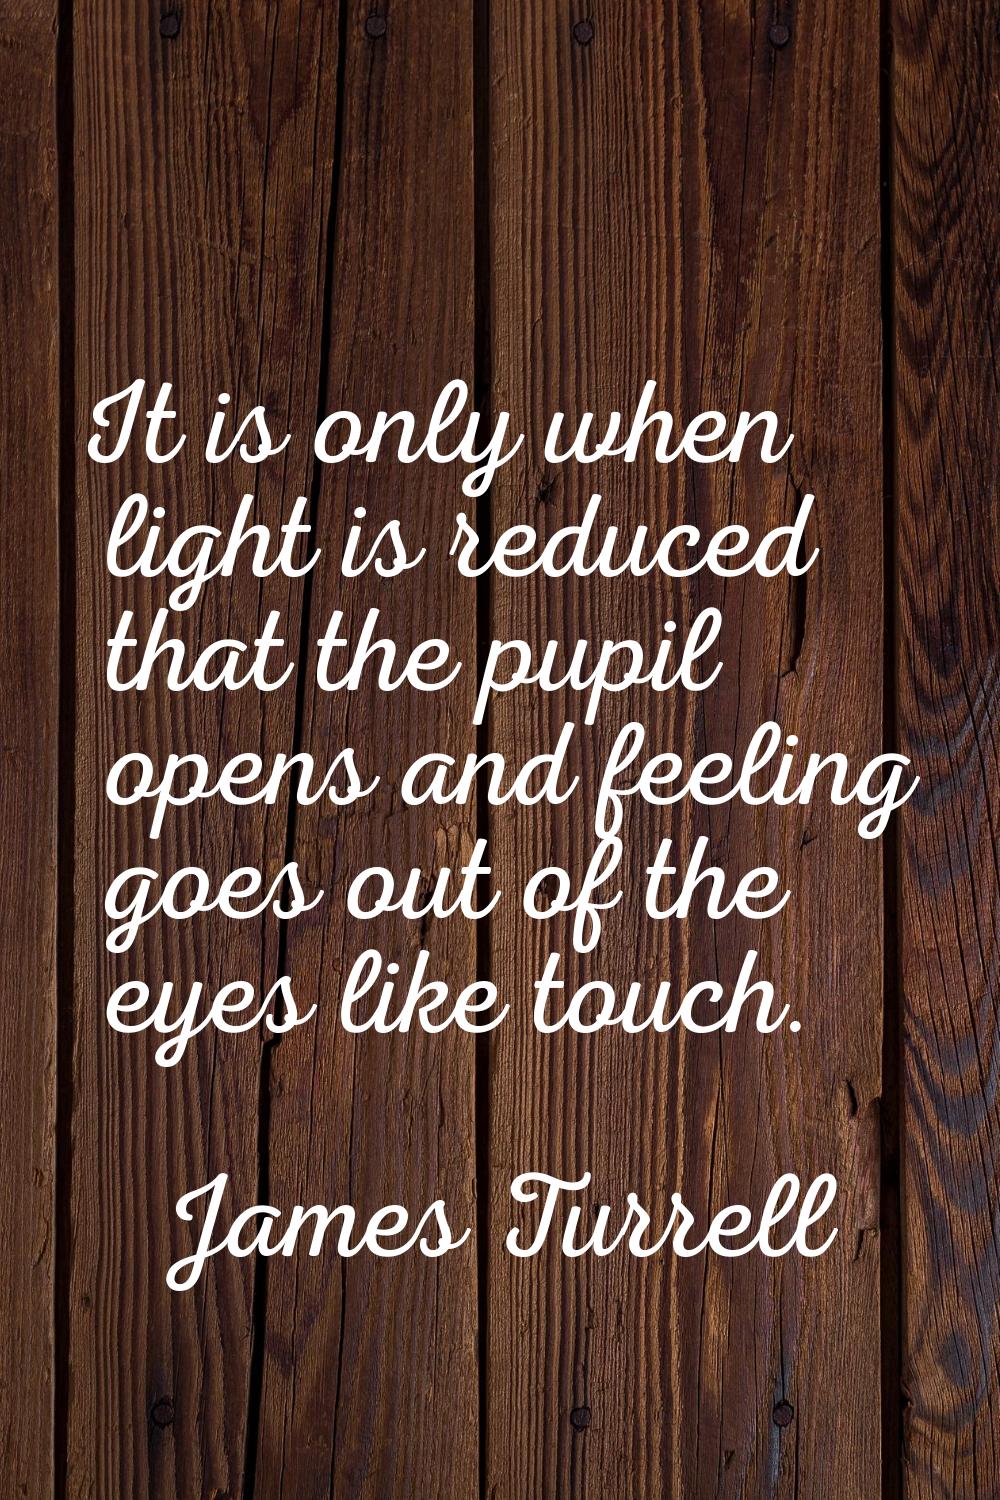 It is only when light is reduced that the pupil opens and feeling goes out of the eyes like touch.